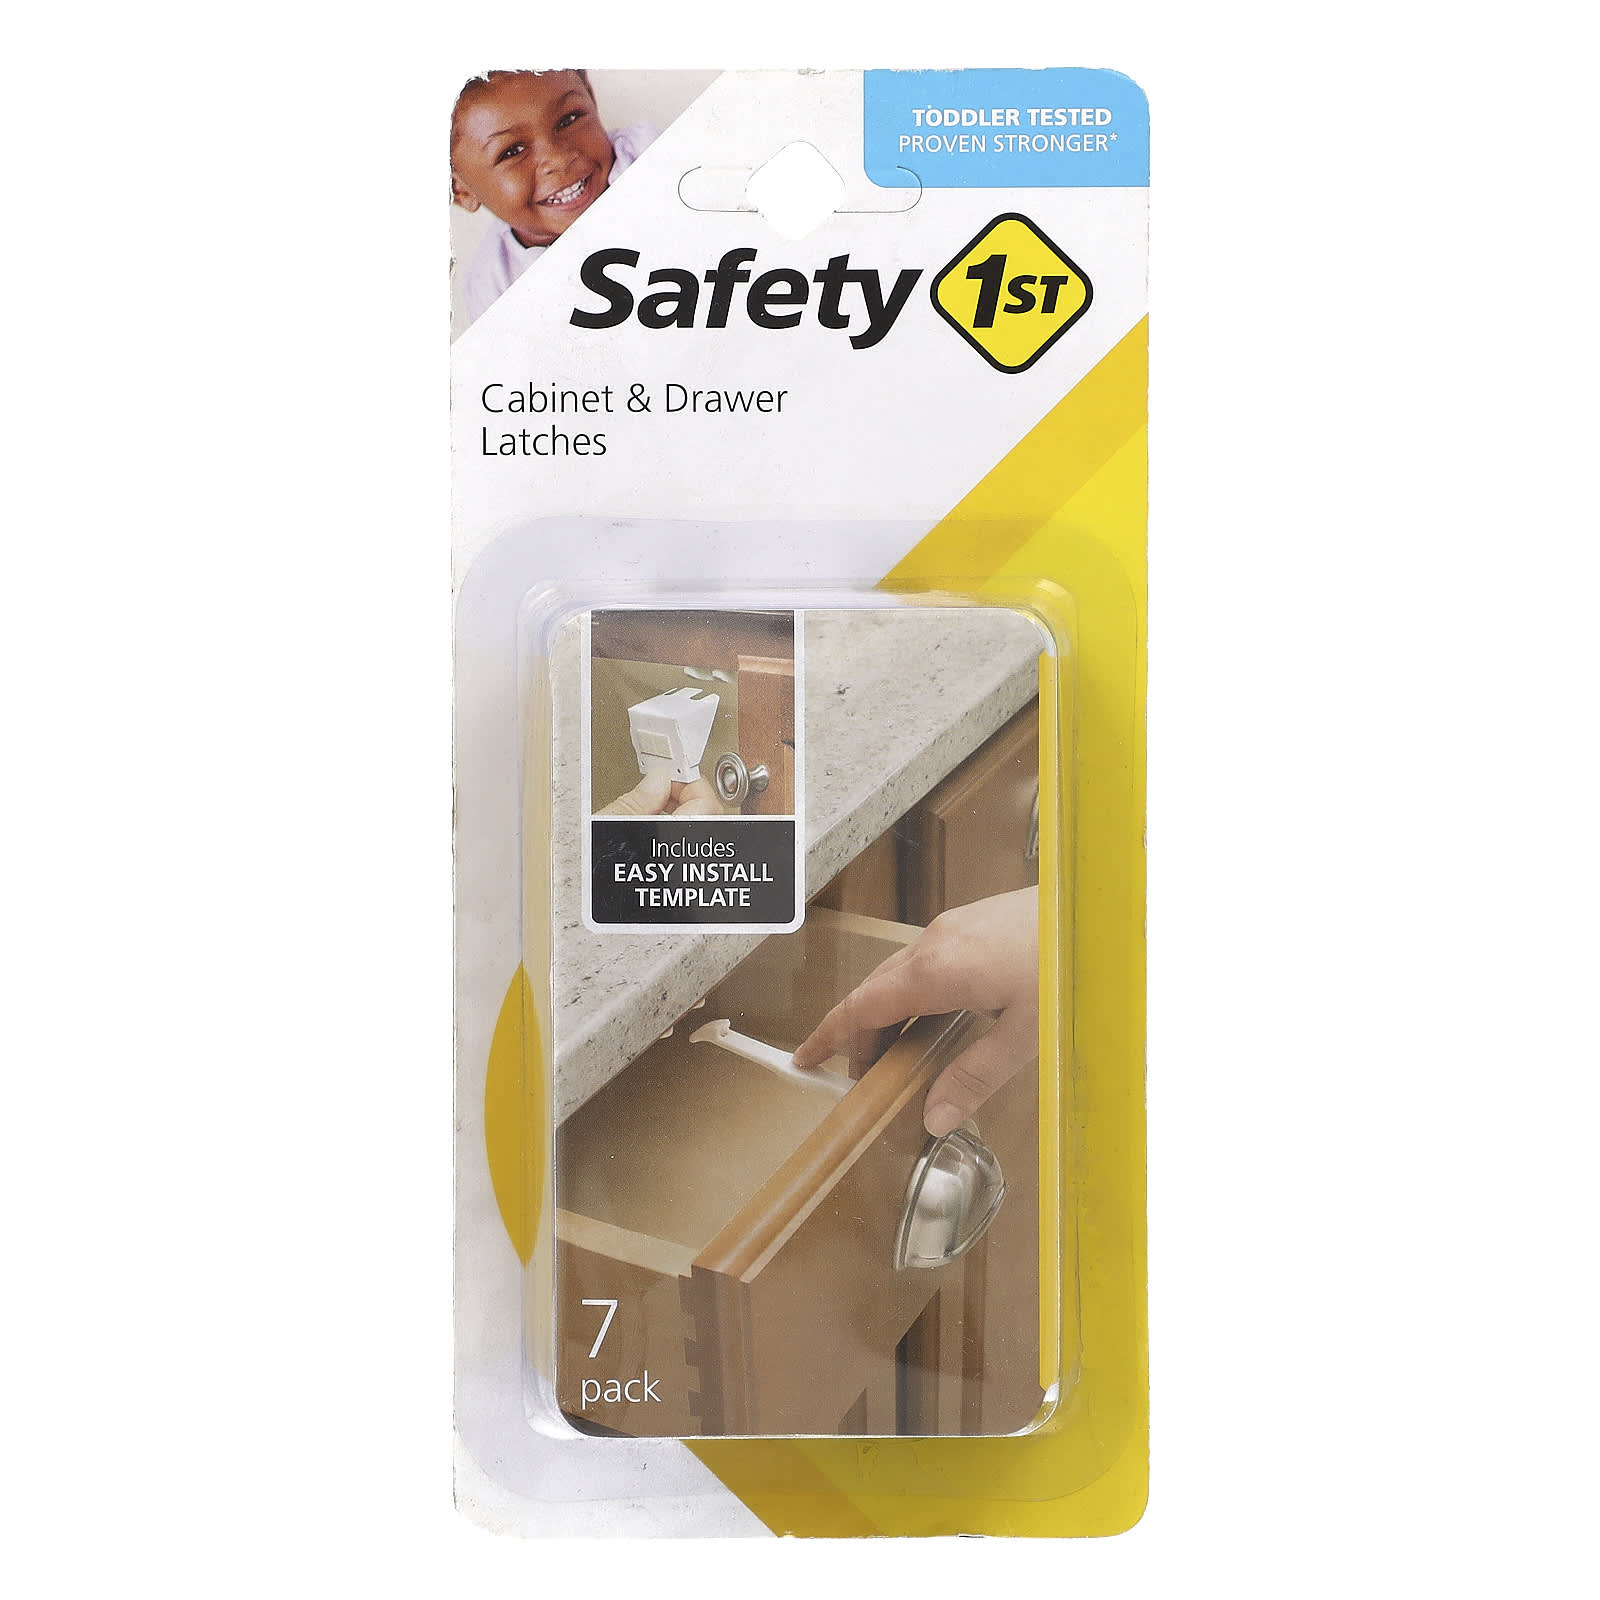 Safety 1st-Cabinet & Drawer Latches-7 Pack